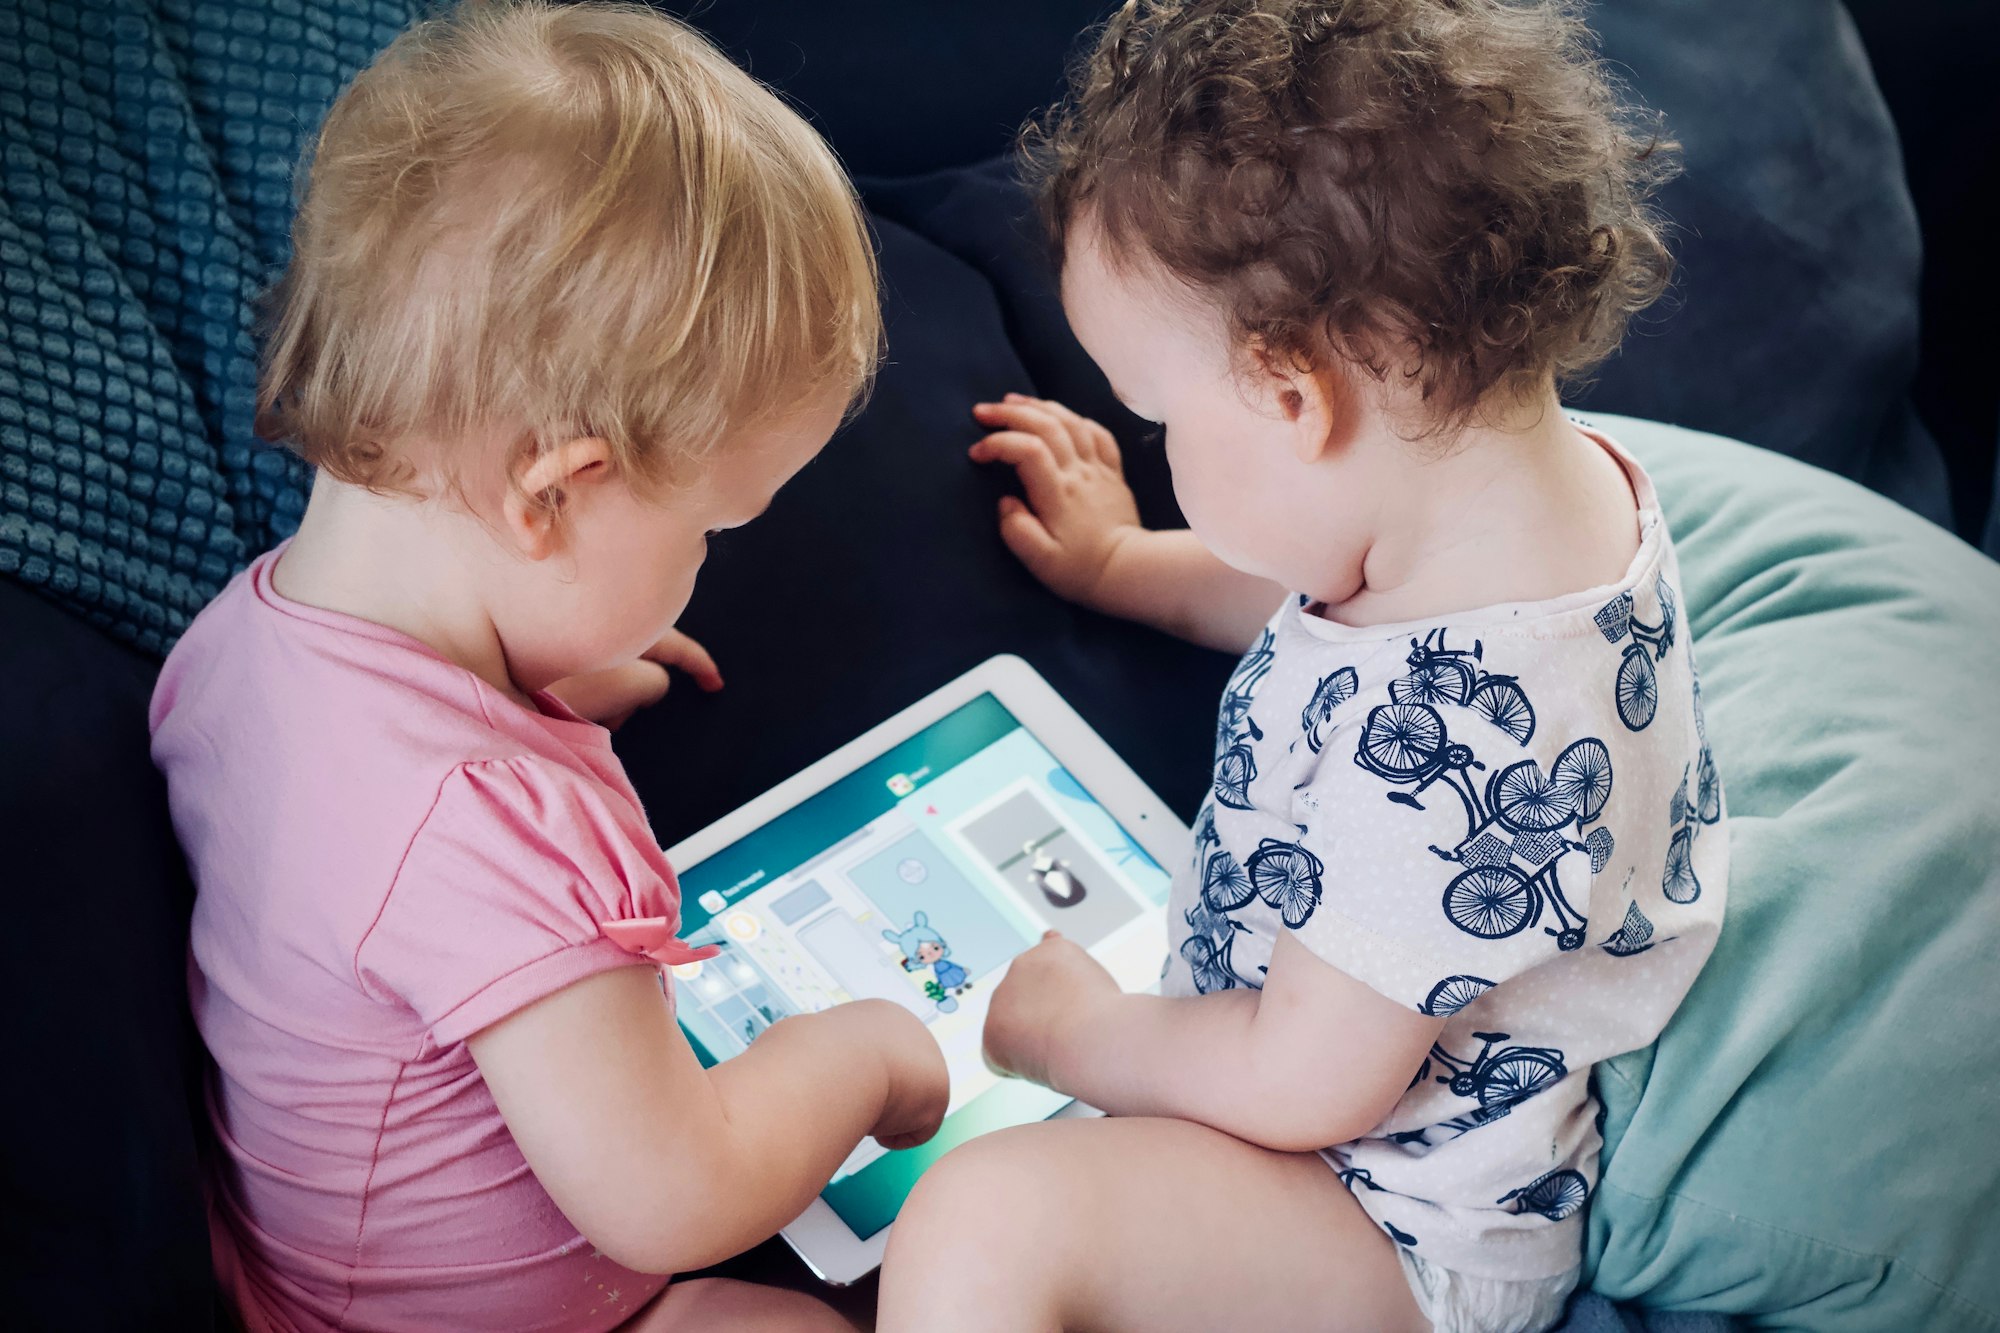 Israeli startup GiantLeap provides parents with better insight into their kids' cognitive abilities